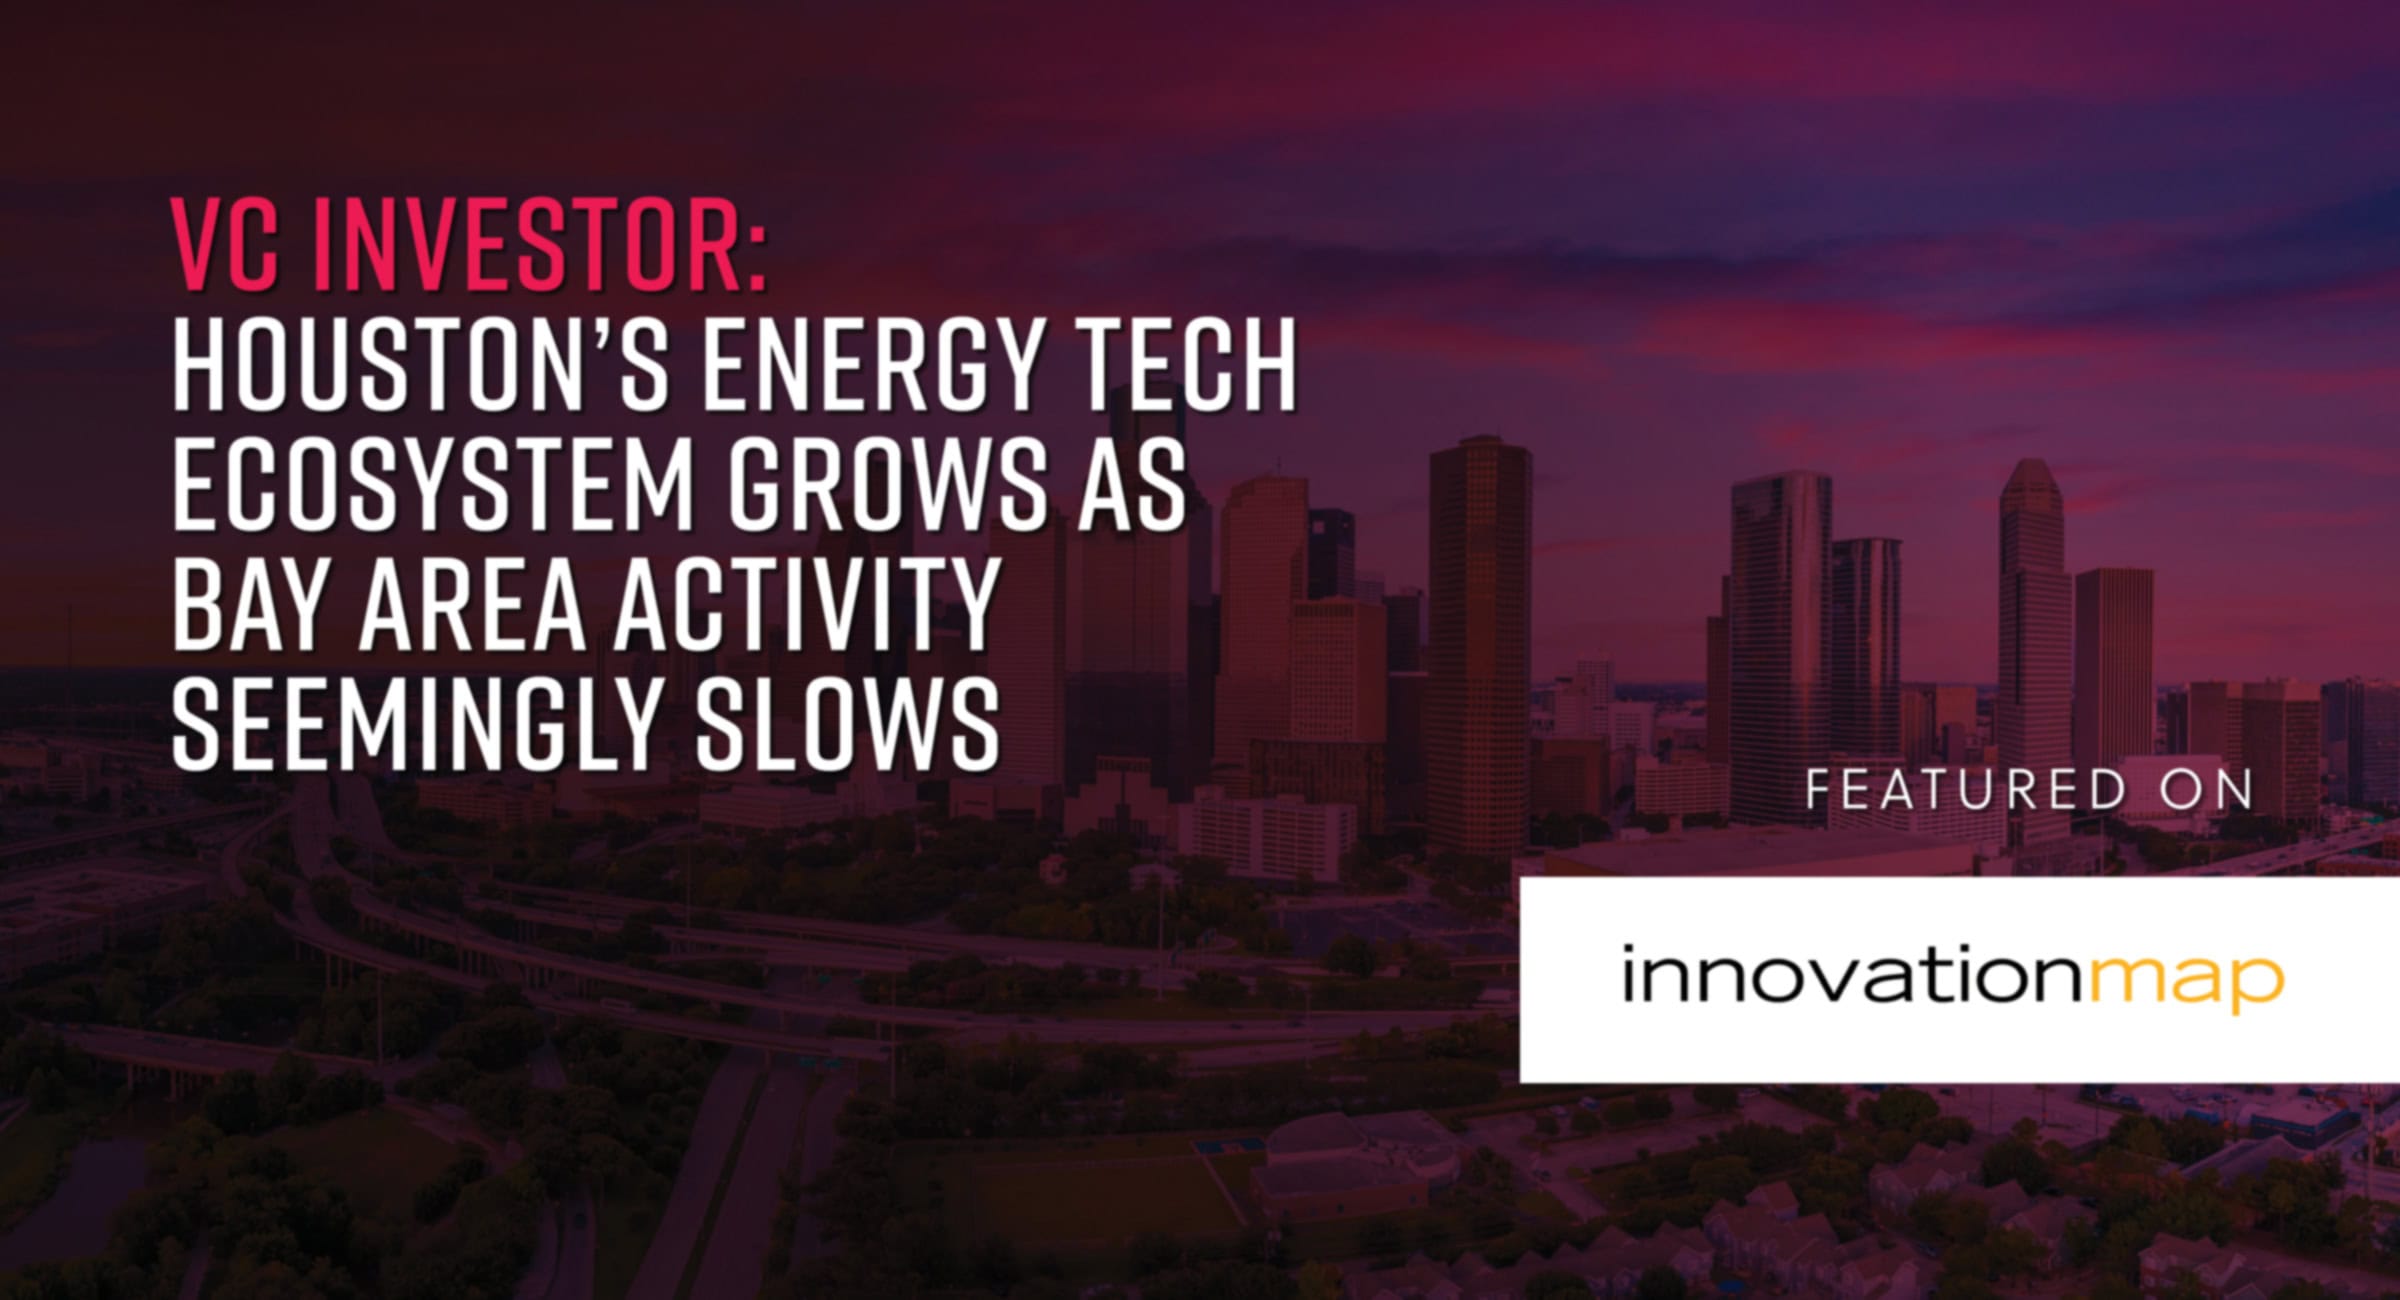 VC investor: Houston's energy tech ecosystem grows as Bay Area activity seemingly slows